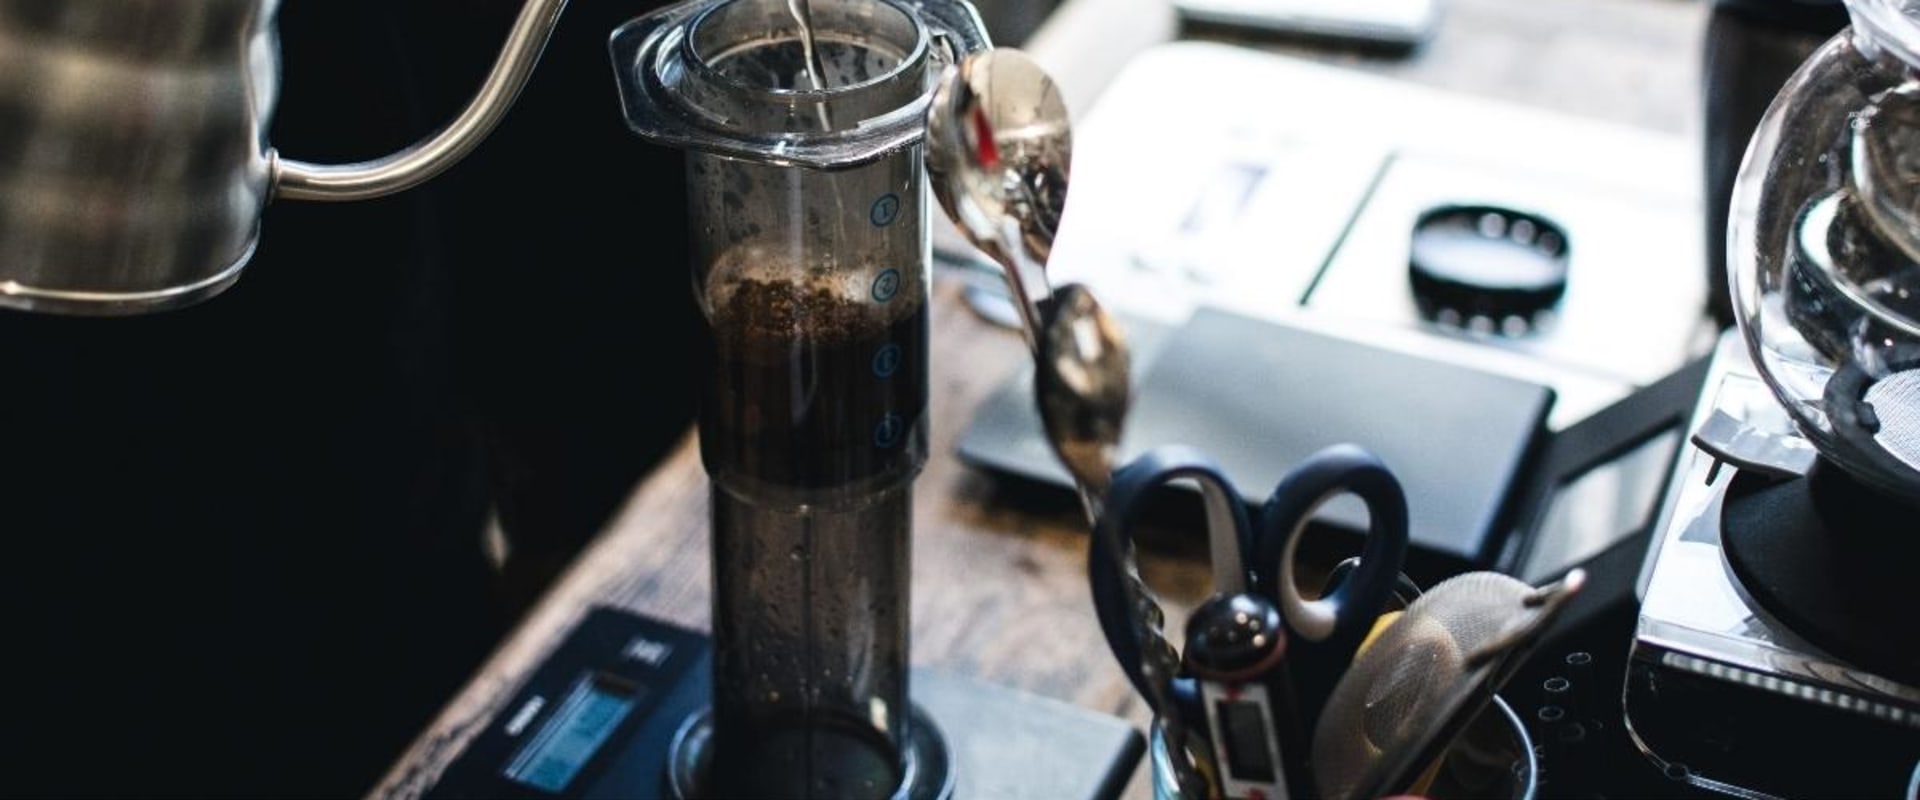 Are coffee makers energy efficient?